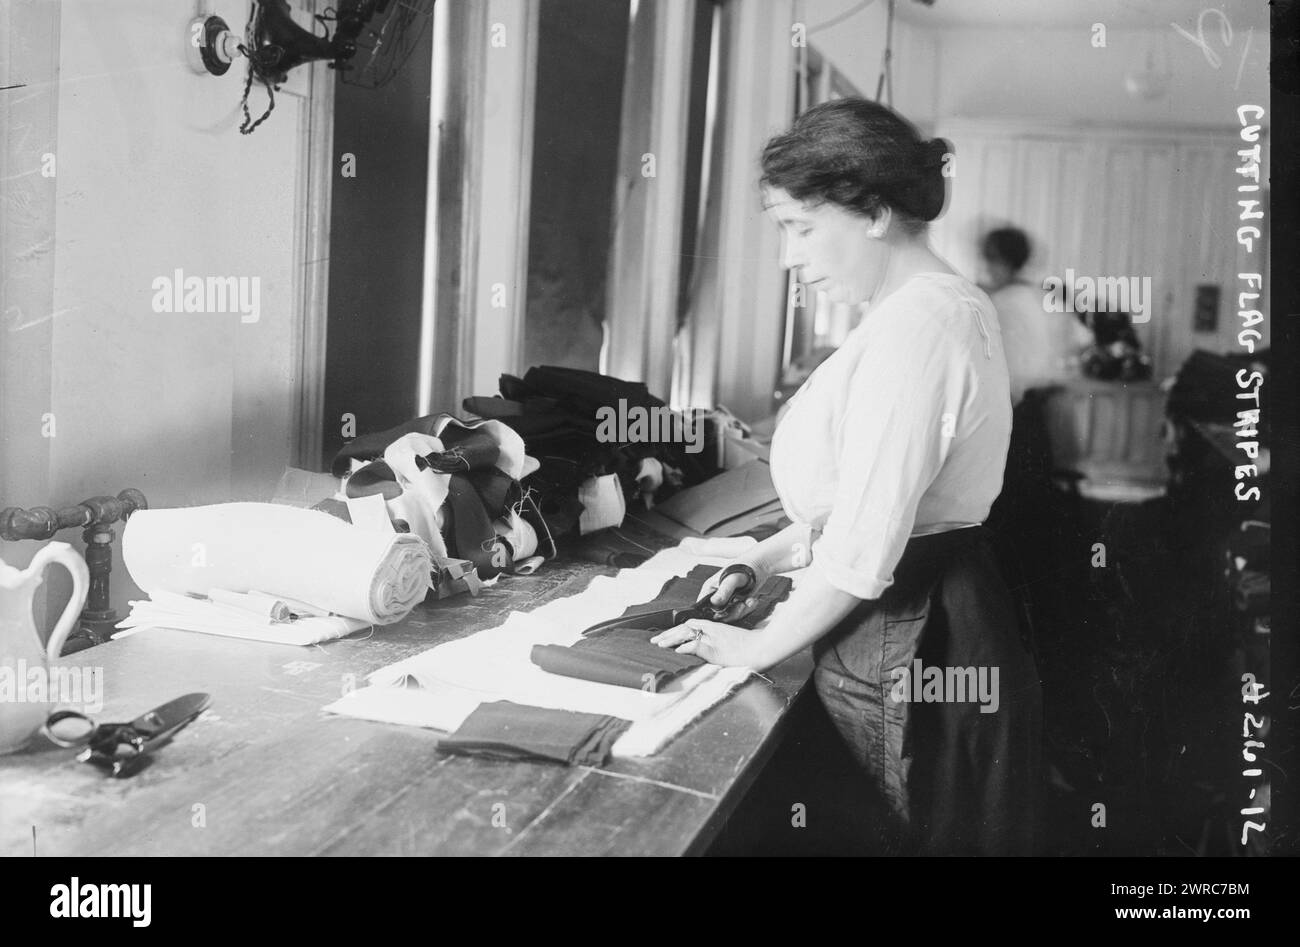 Cutting flag stripes, Photograph shows women cutting stripes for American flags with scissors at the Brooklyn Navy Yard, Brooklyn, New York., 1917 July 7, Glass negatives, 1 negative: glass Stock Photo